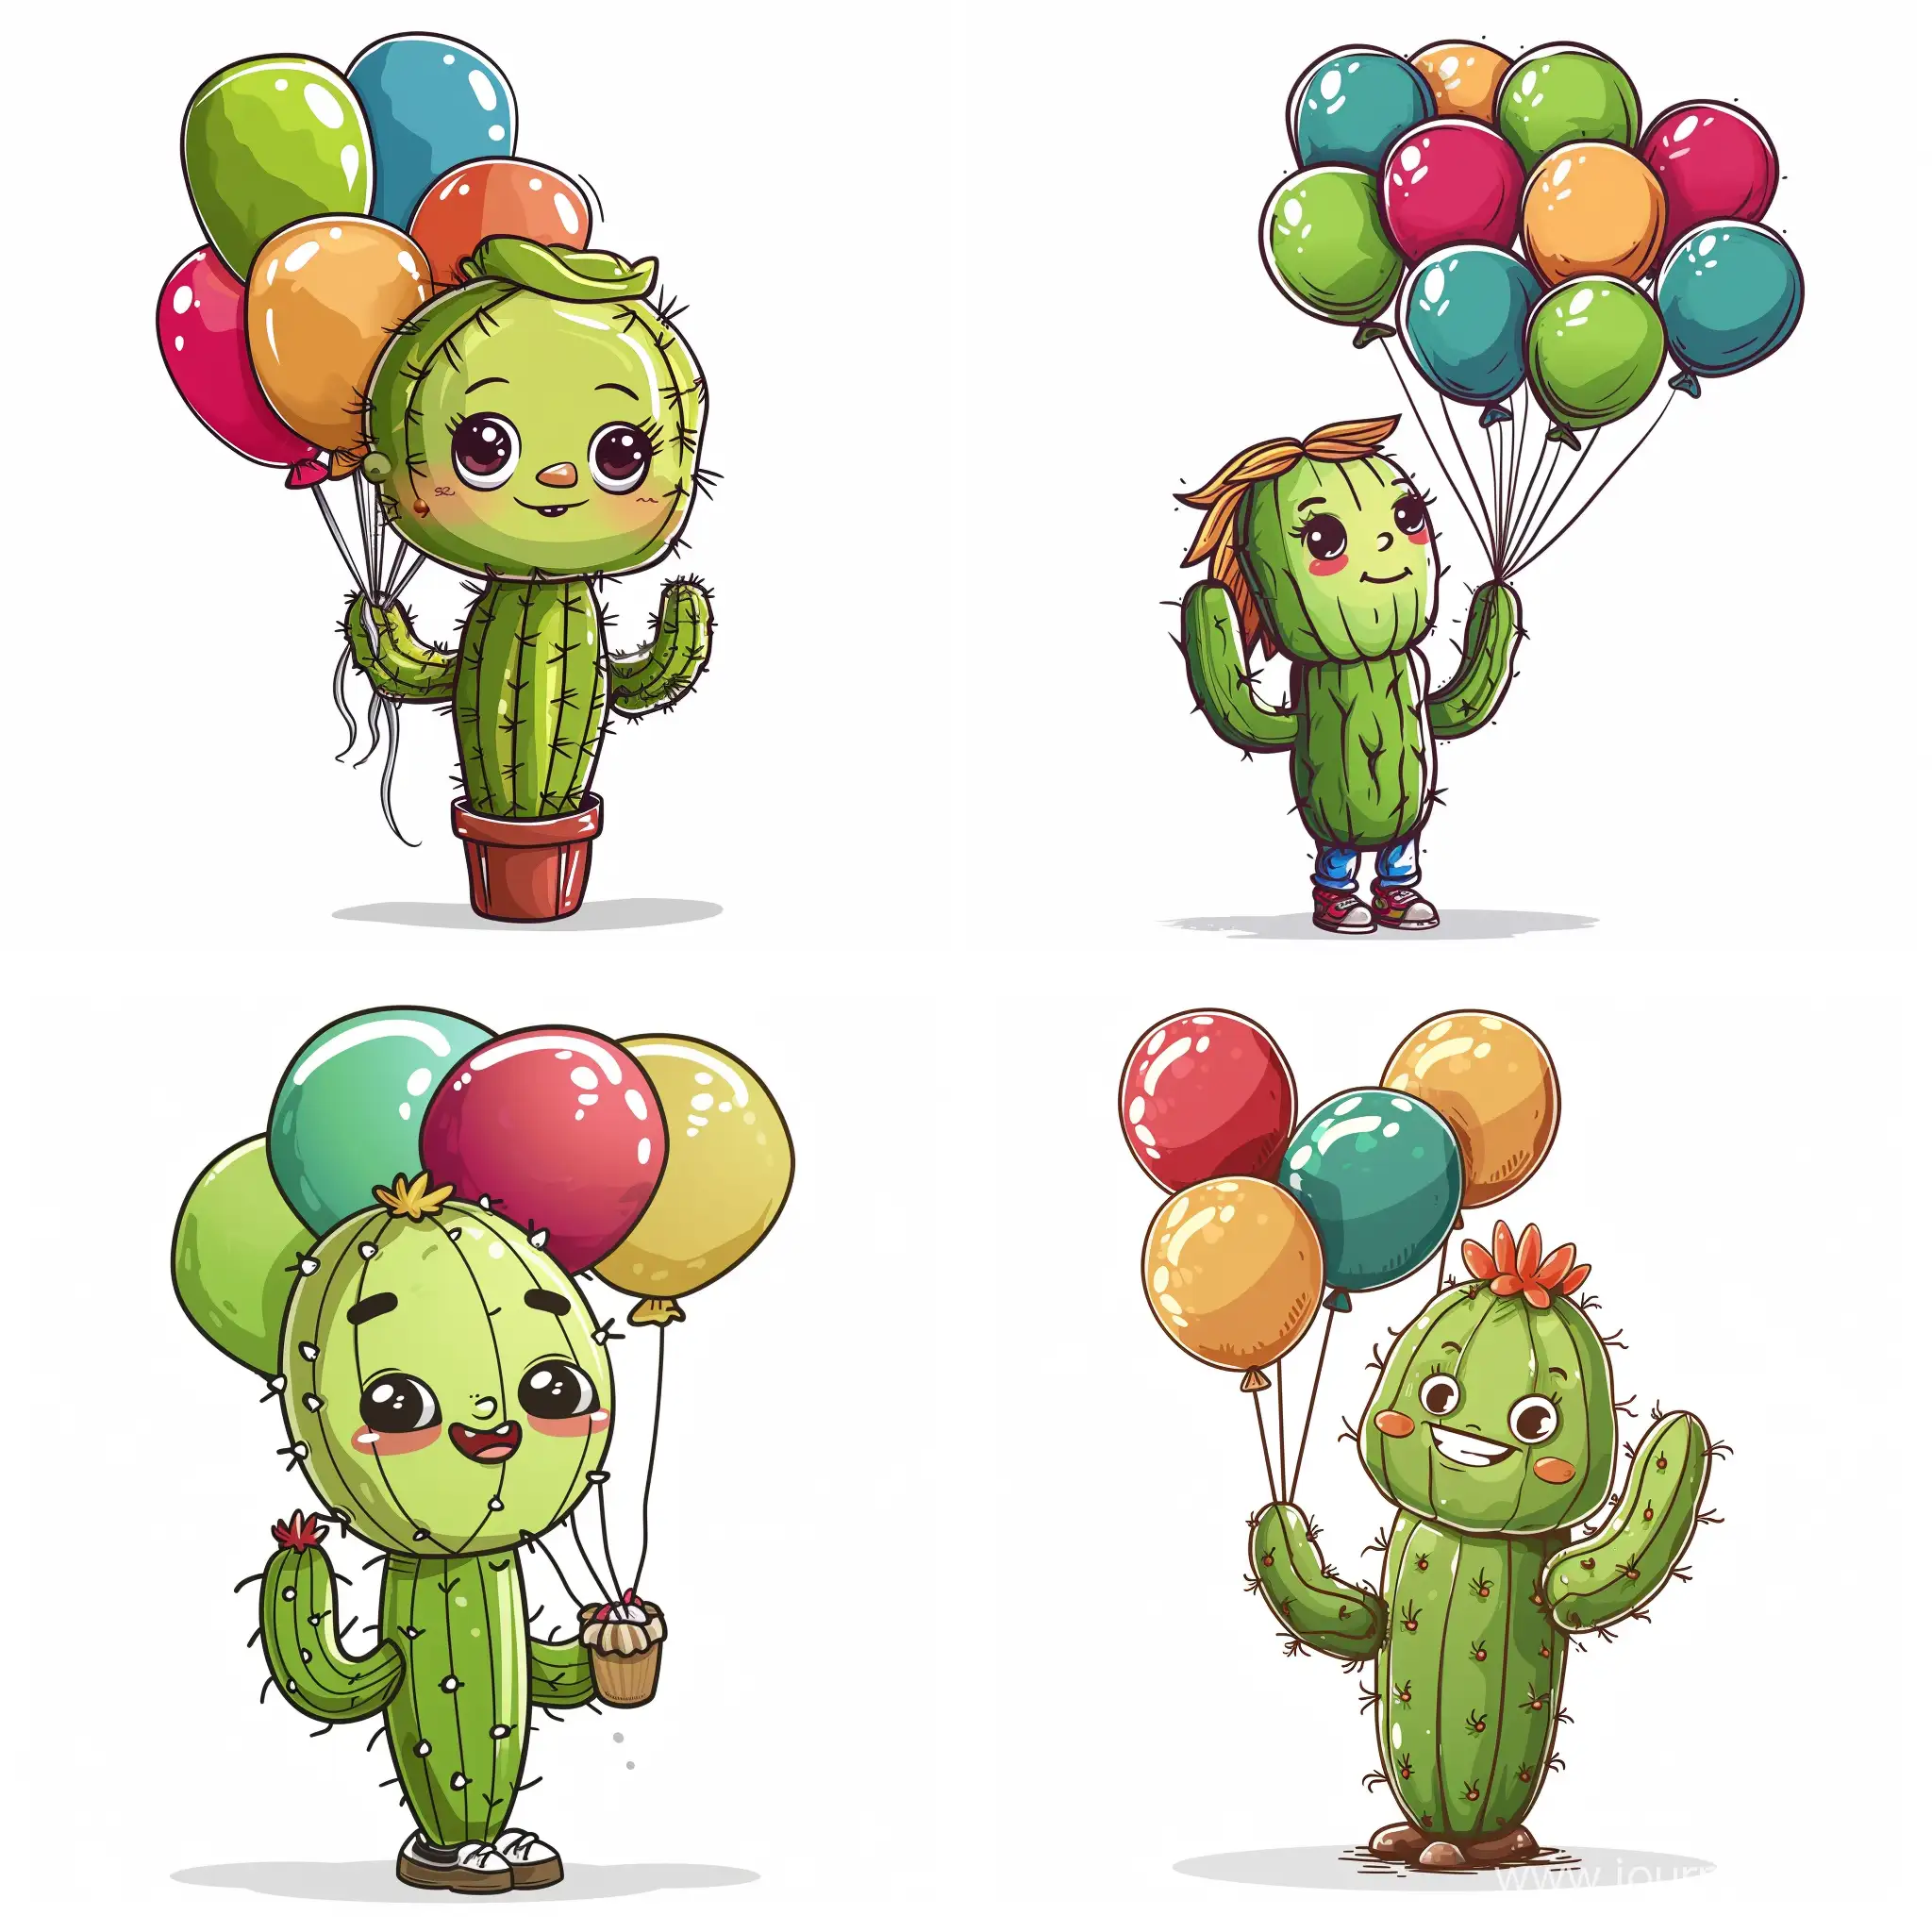 Cartoon character of a cactus with balloons in her hand .she appears to be selling balloons. Vector drawing illustrator on white background. 